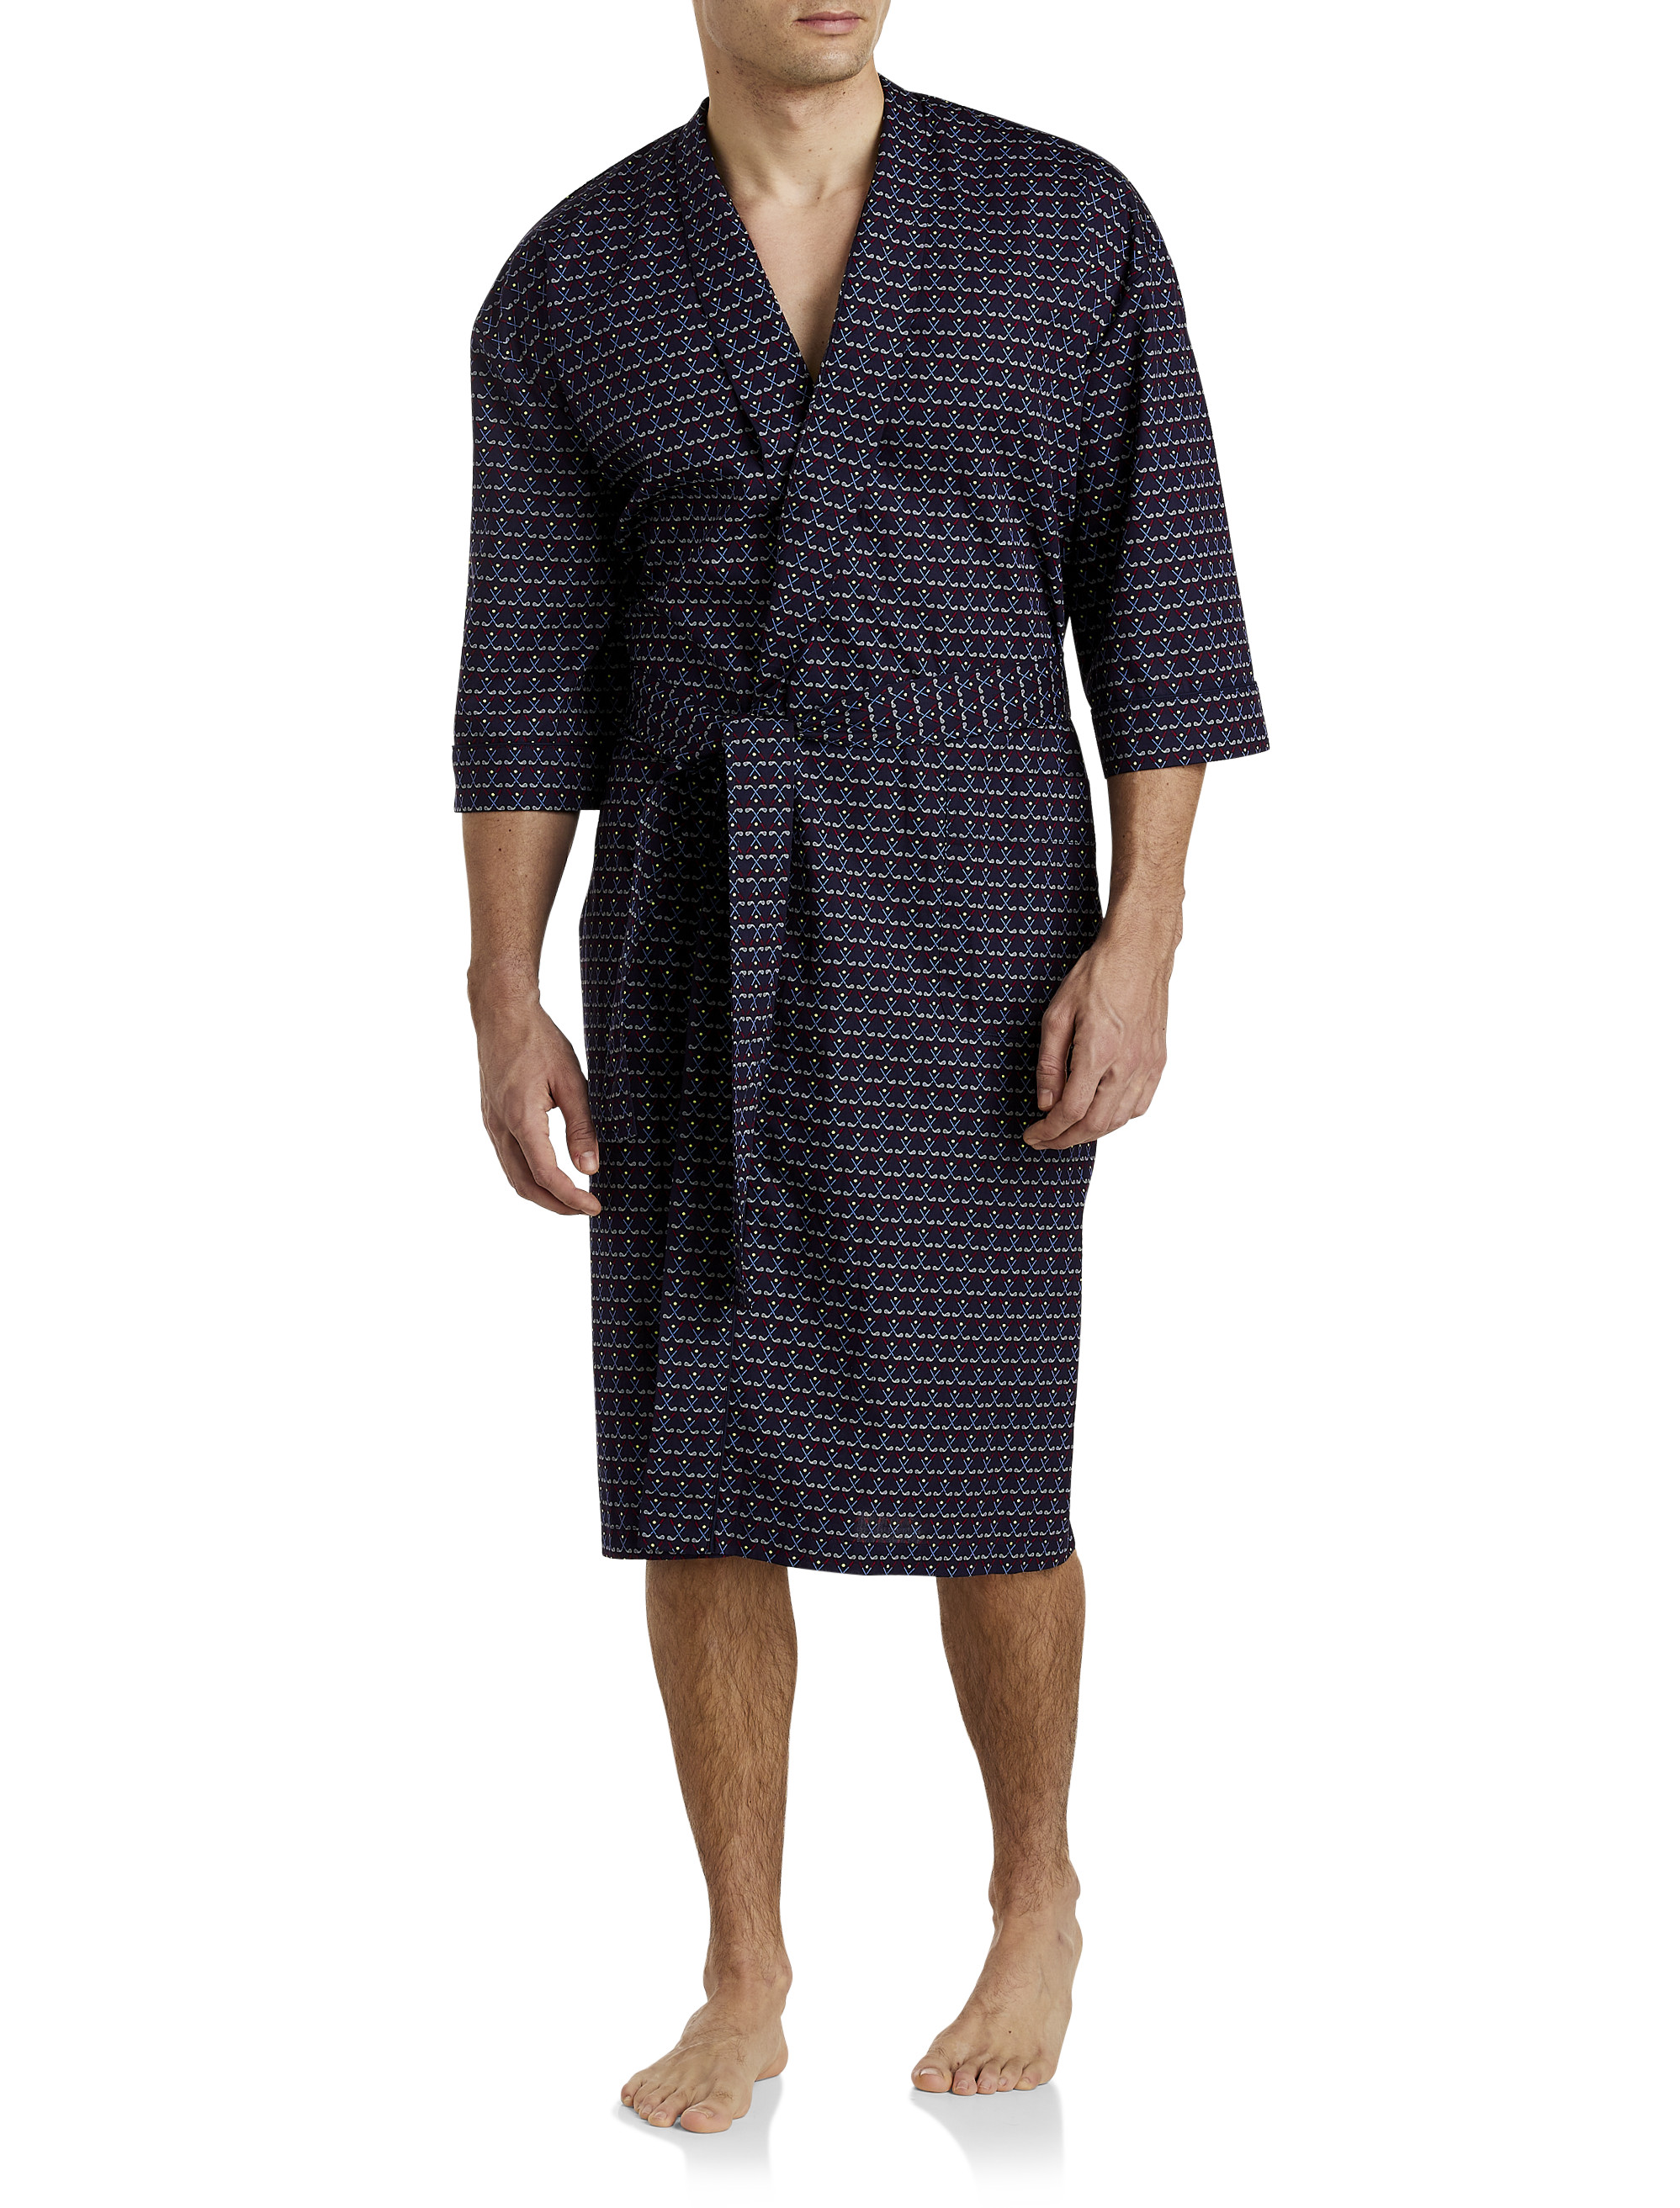 Tall Men's Robe: Charcoal Robes for Tall Guys